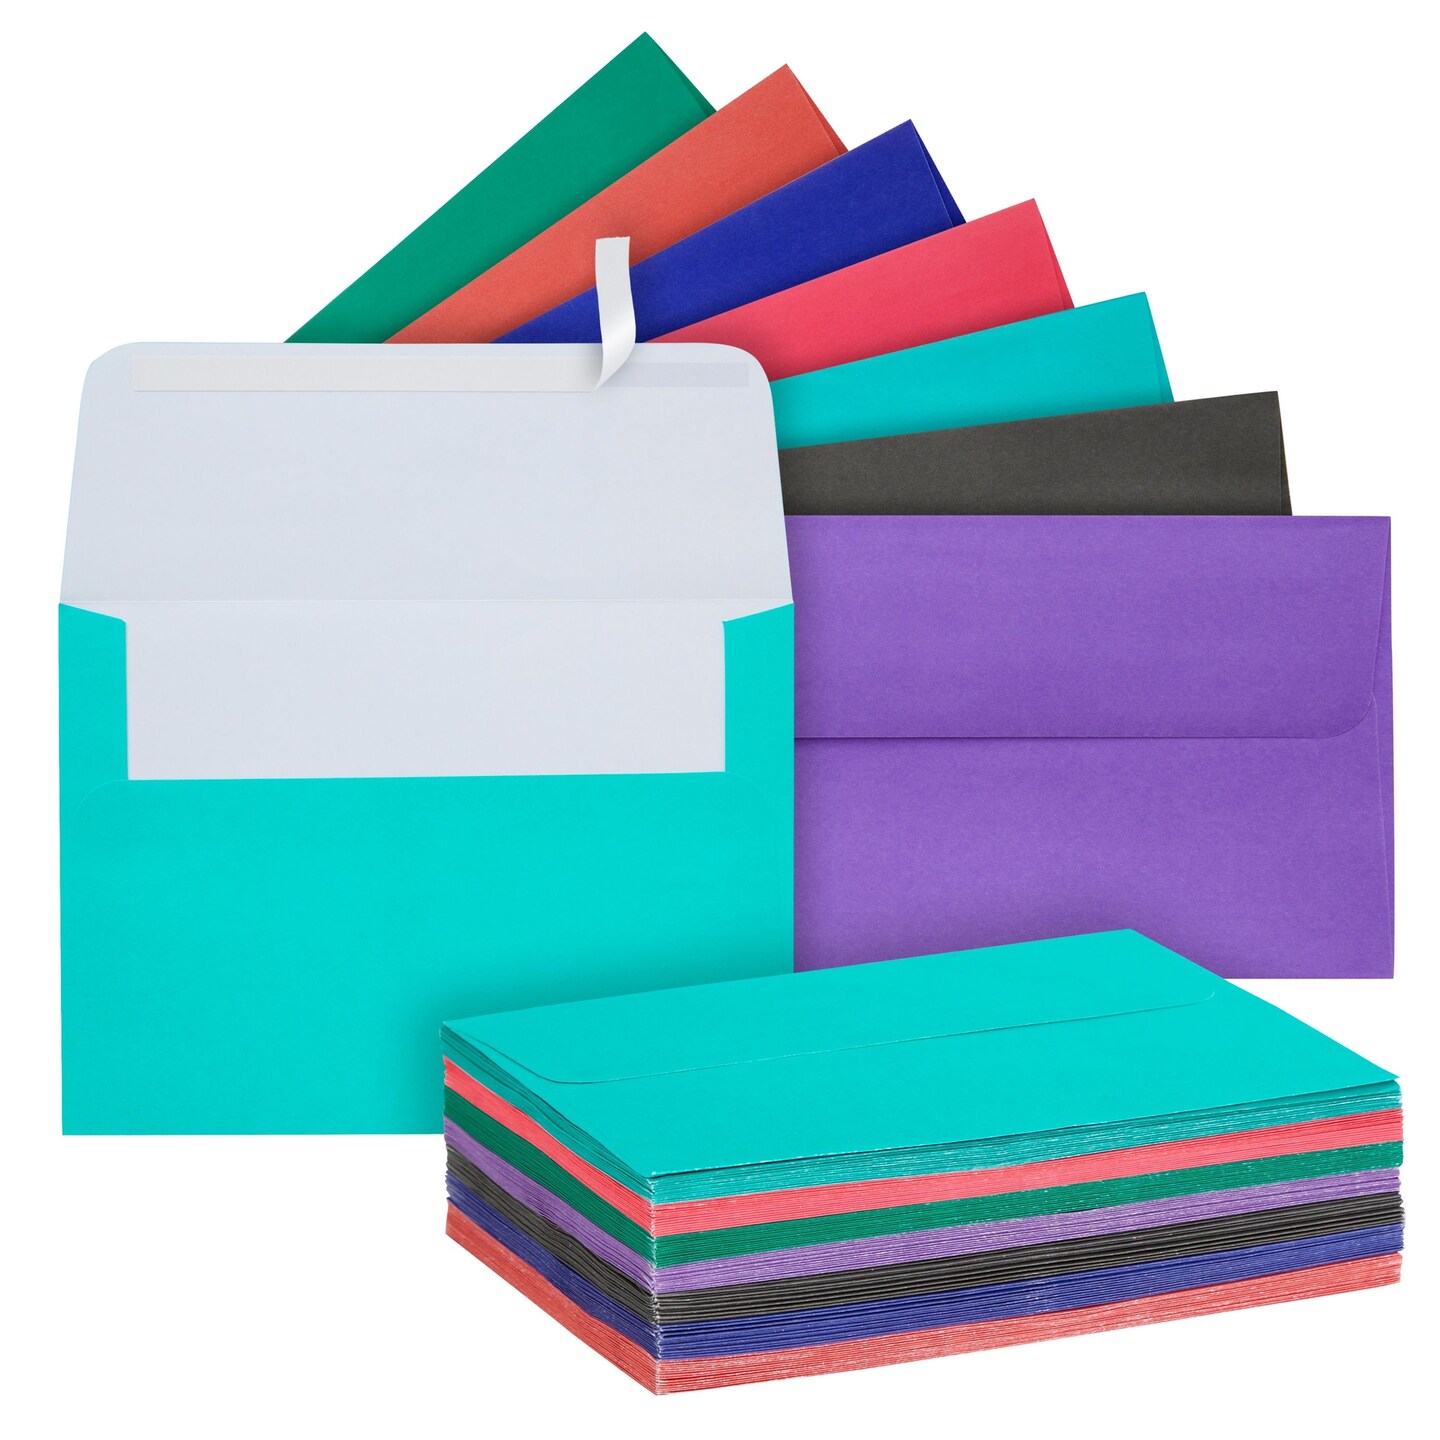 A7 5x7 Blank Cards With Envelopes Kit for Invitations, Card Making